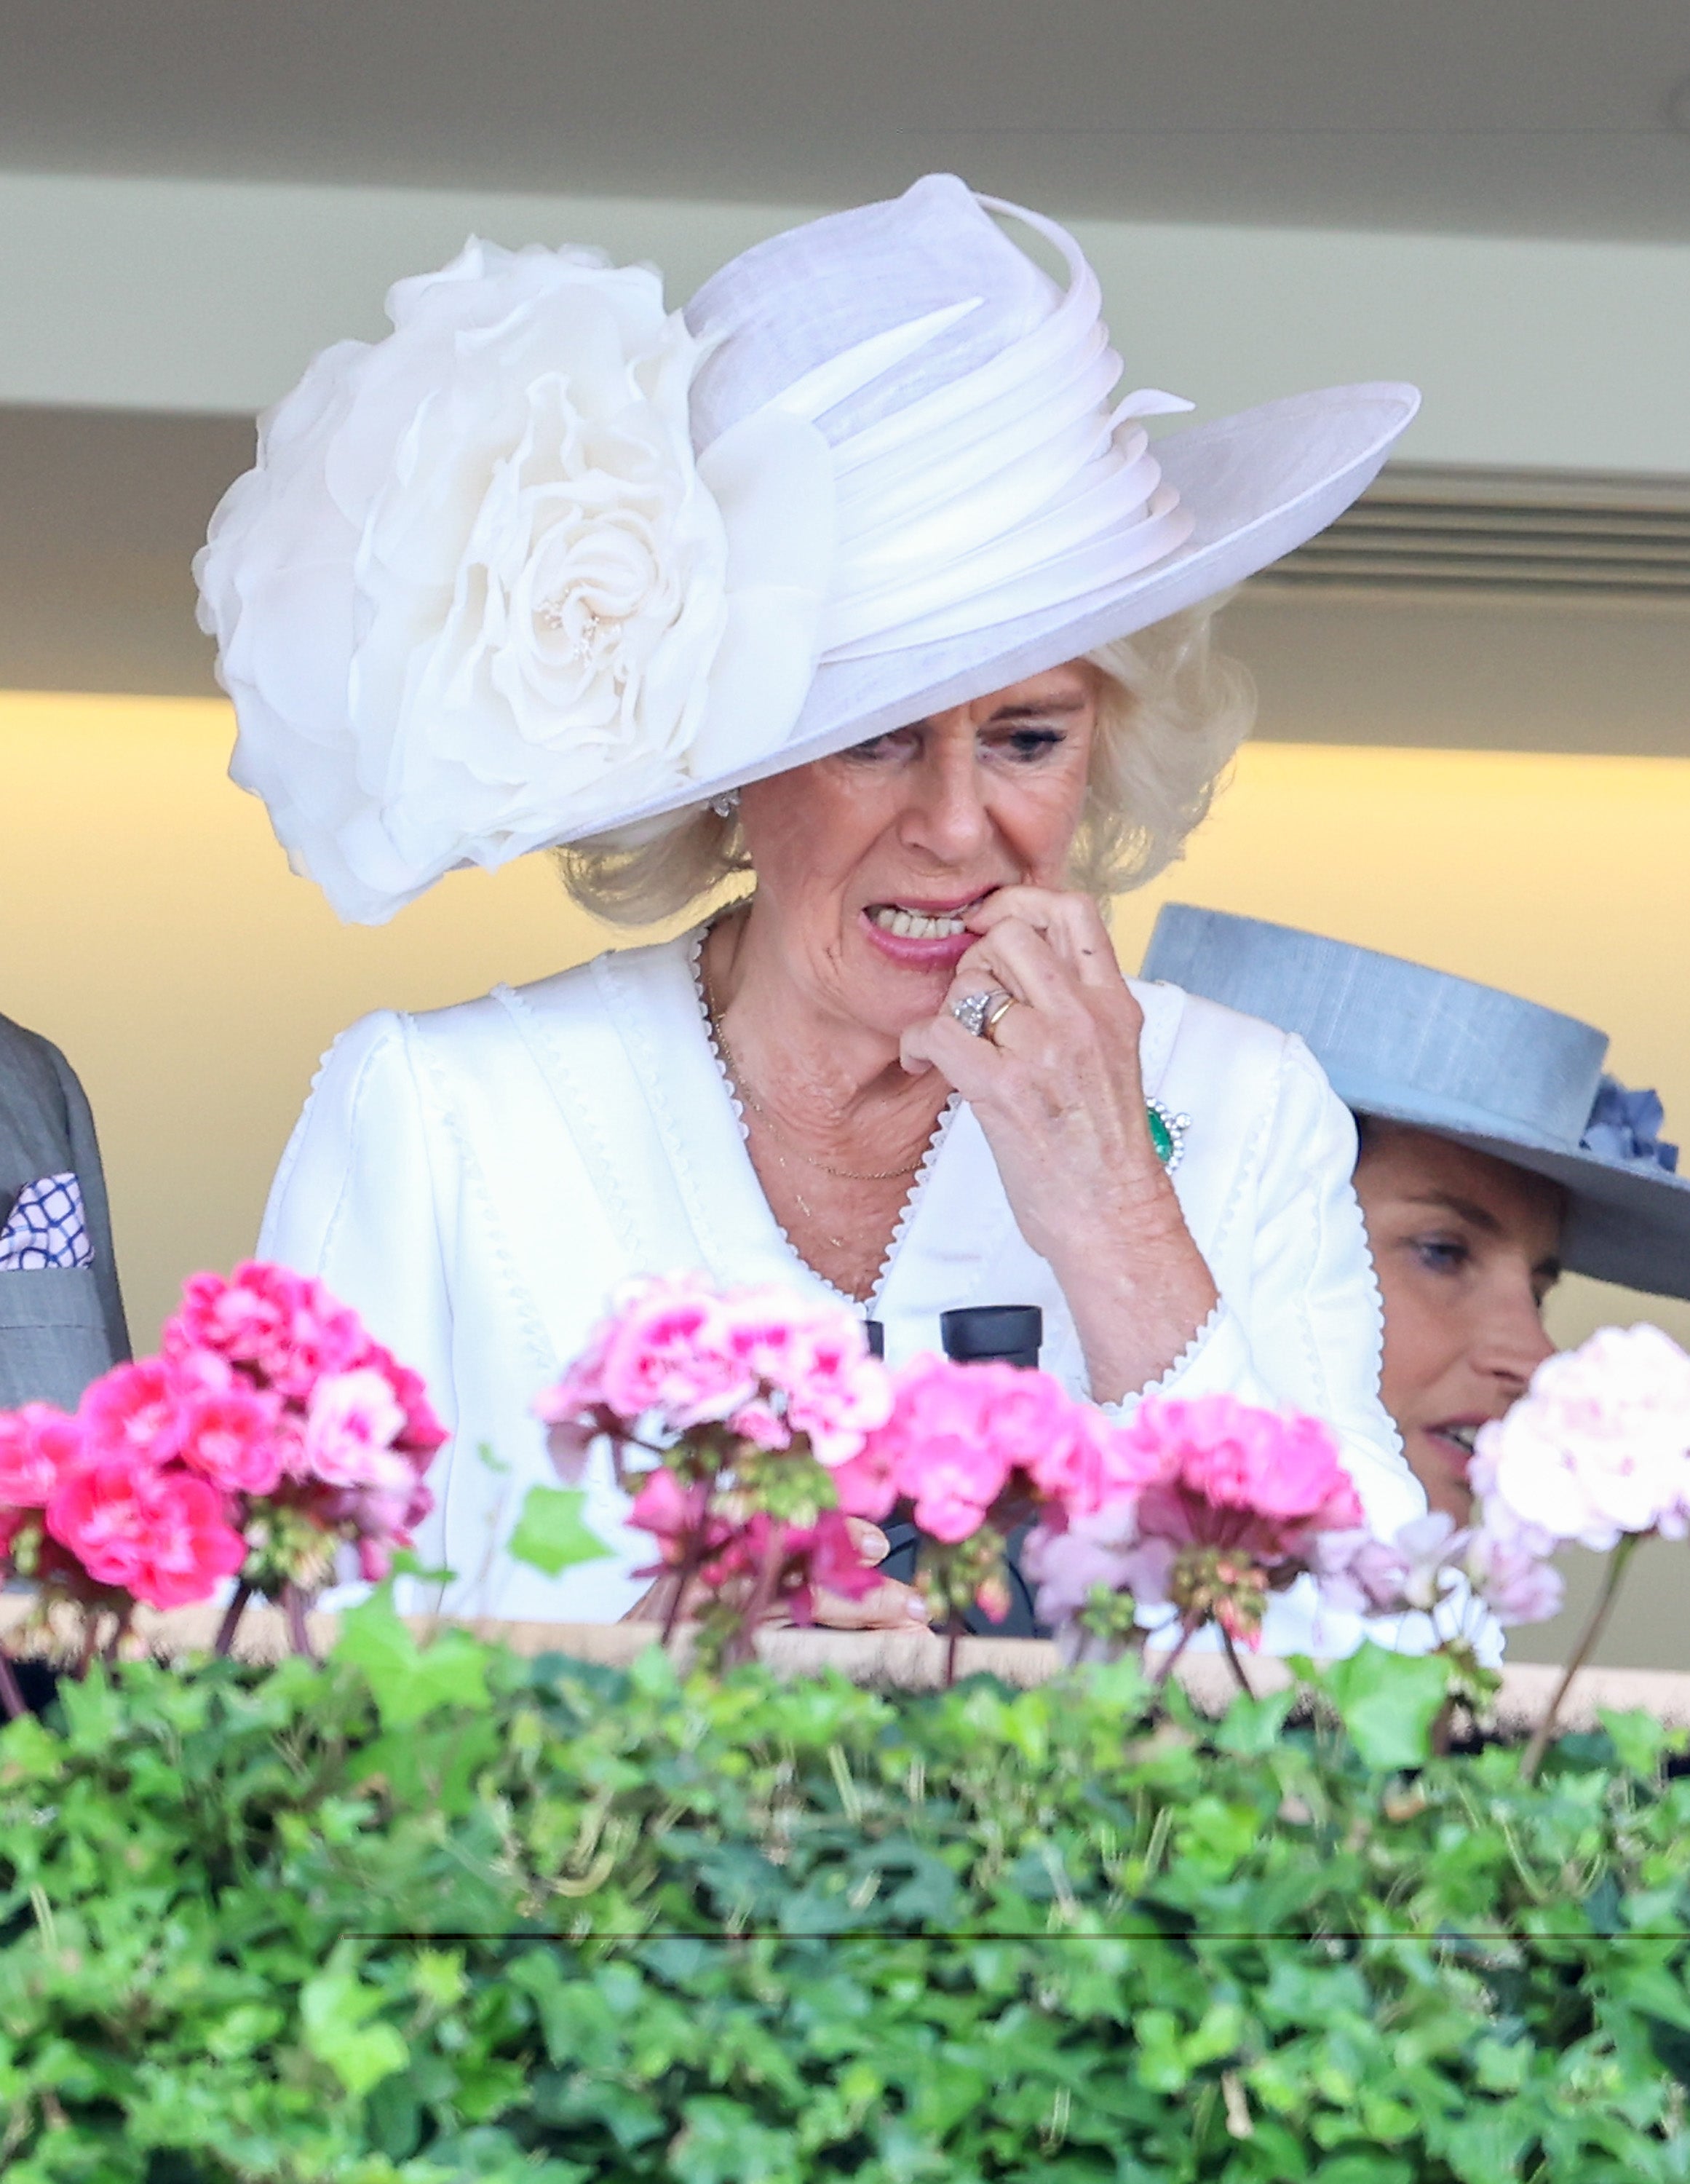 It was a nail-biting watch for the royal, literally.